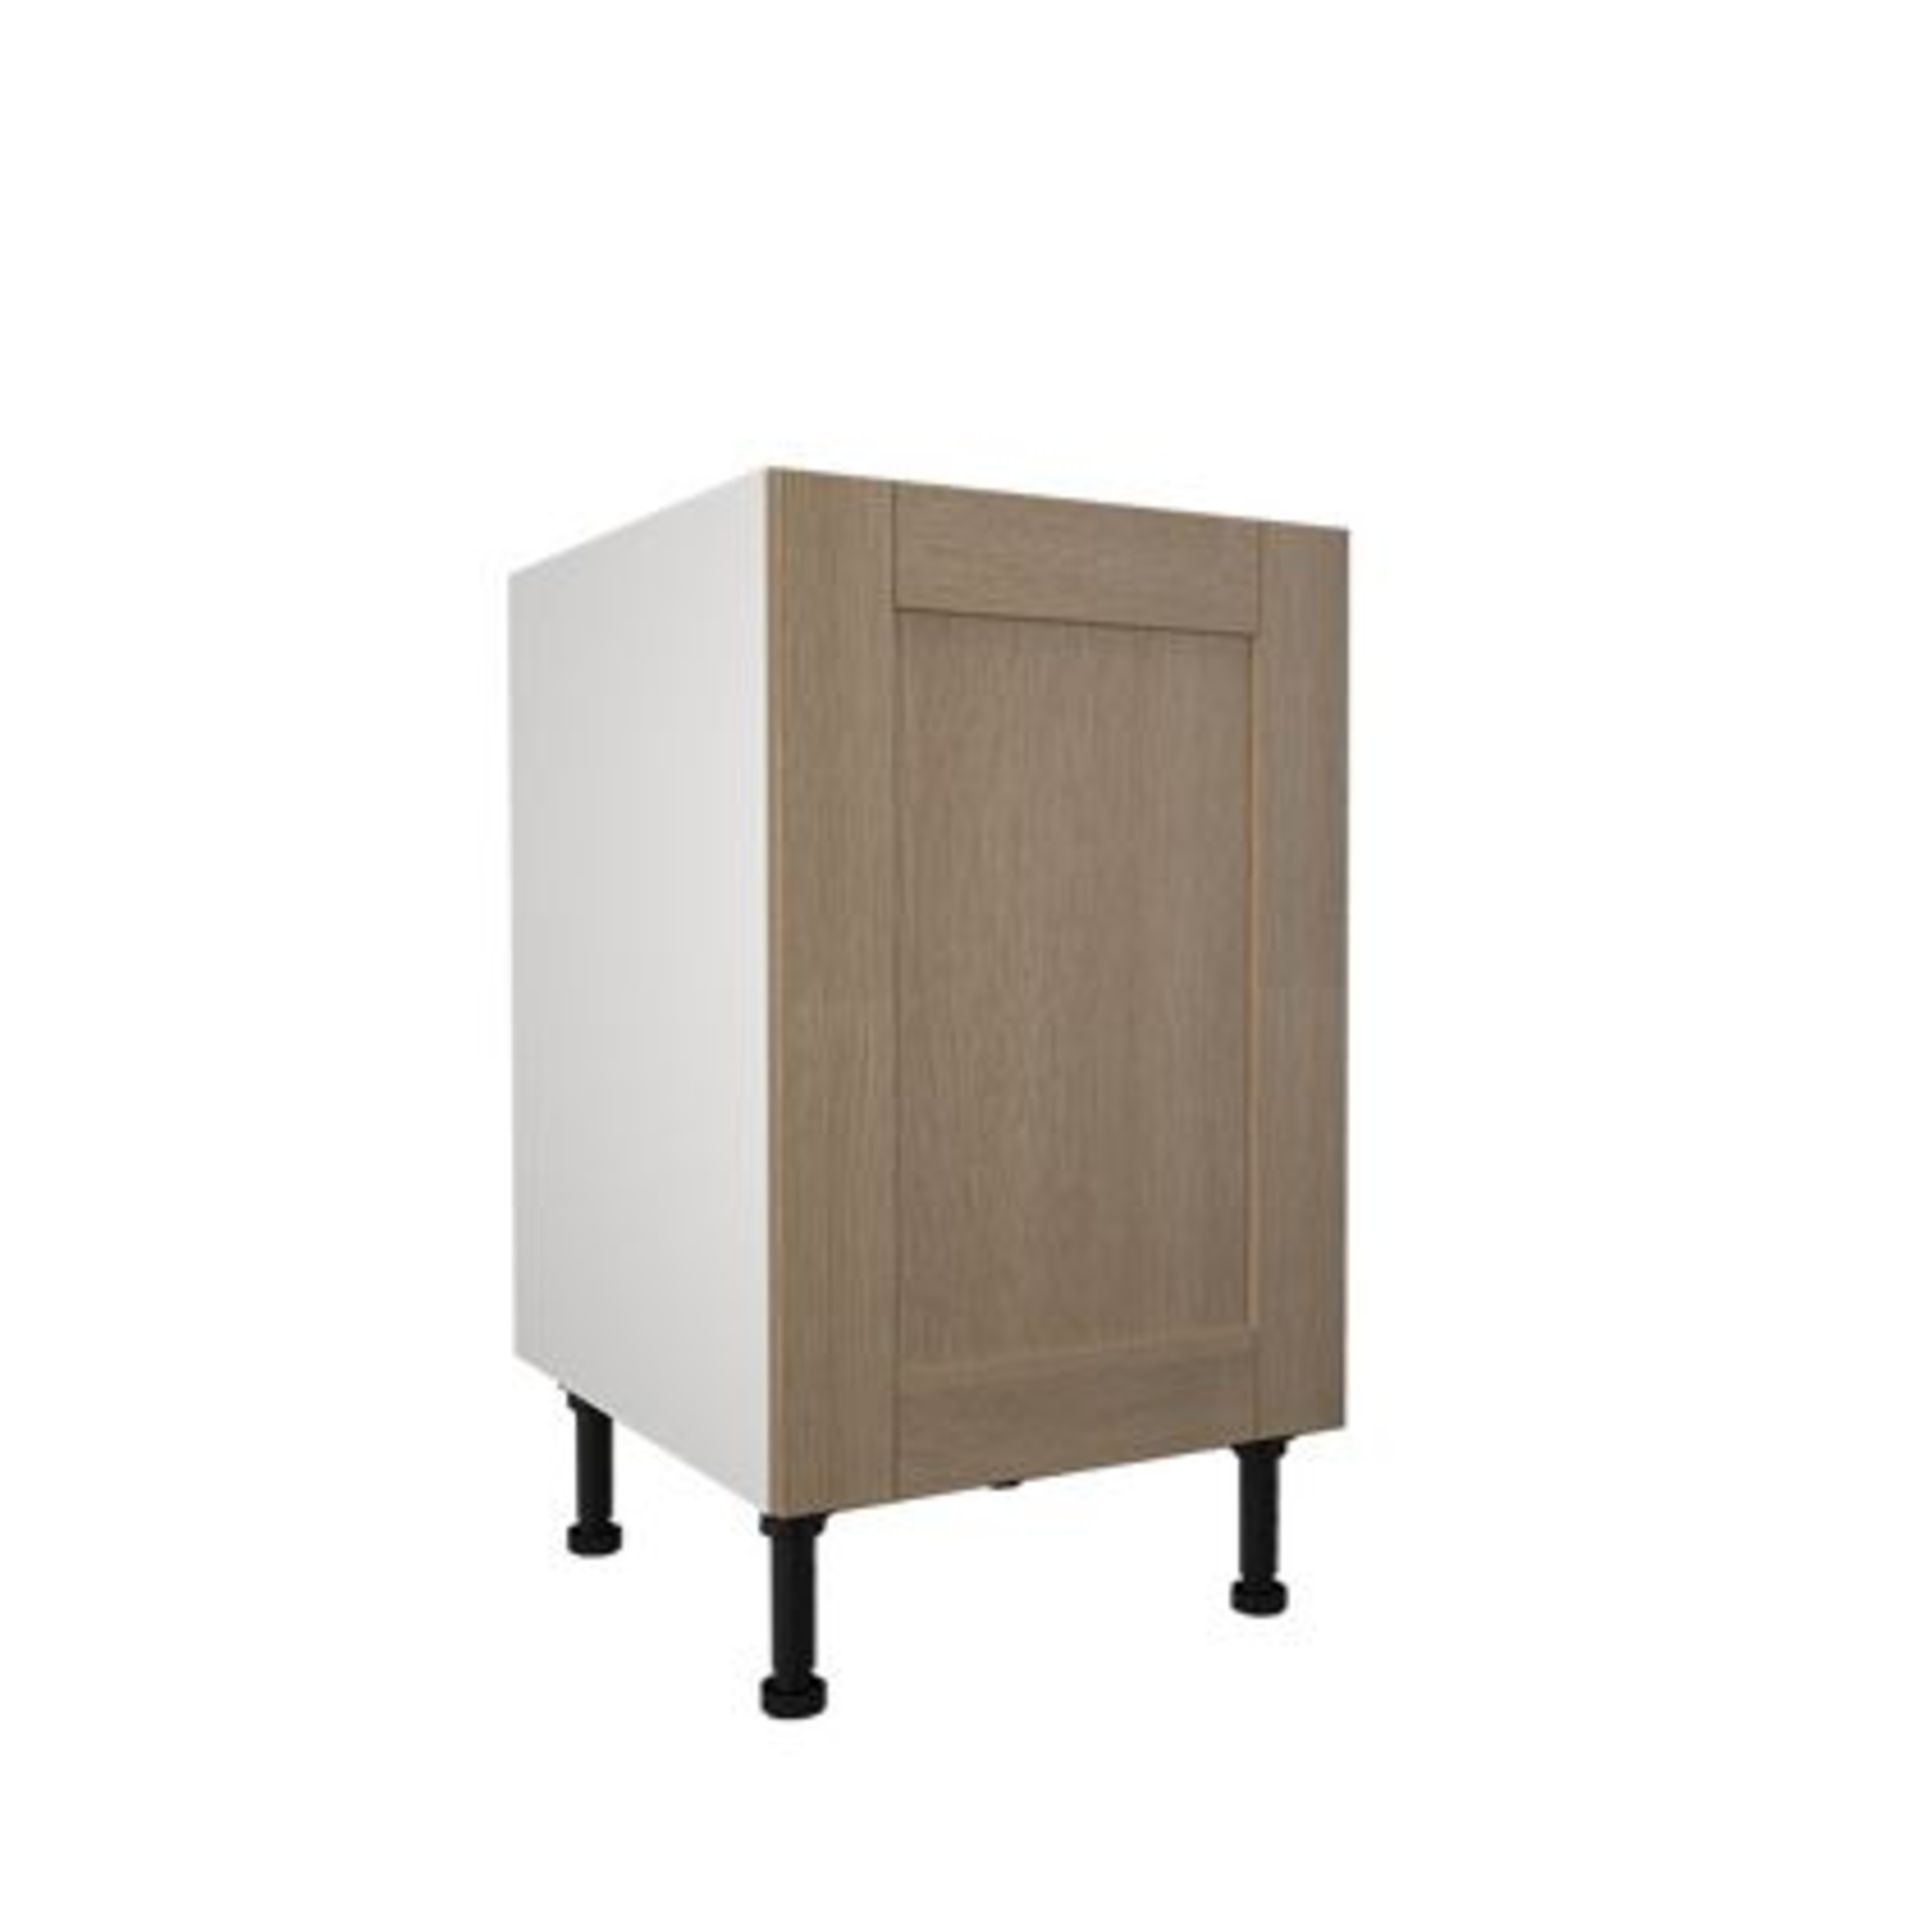 500mm BASE CABINET  WITH HILINE DOOR  - White kitchen cabinet with  light oak vynal wrap door INCLU